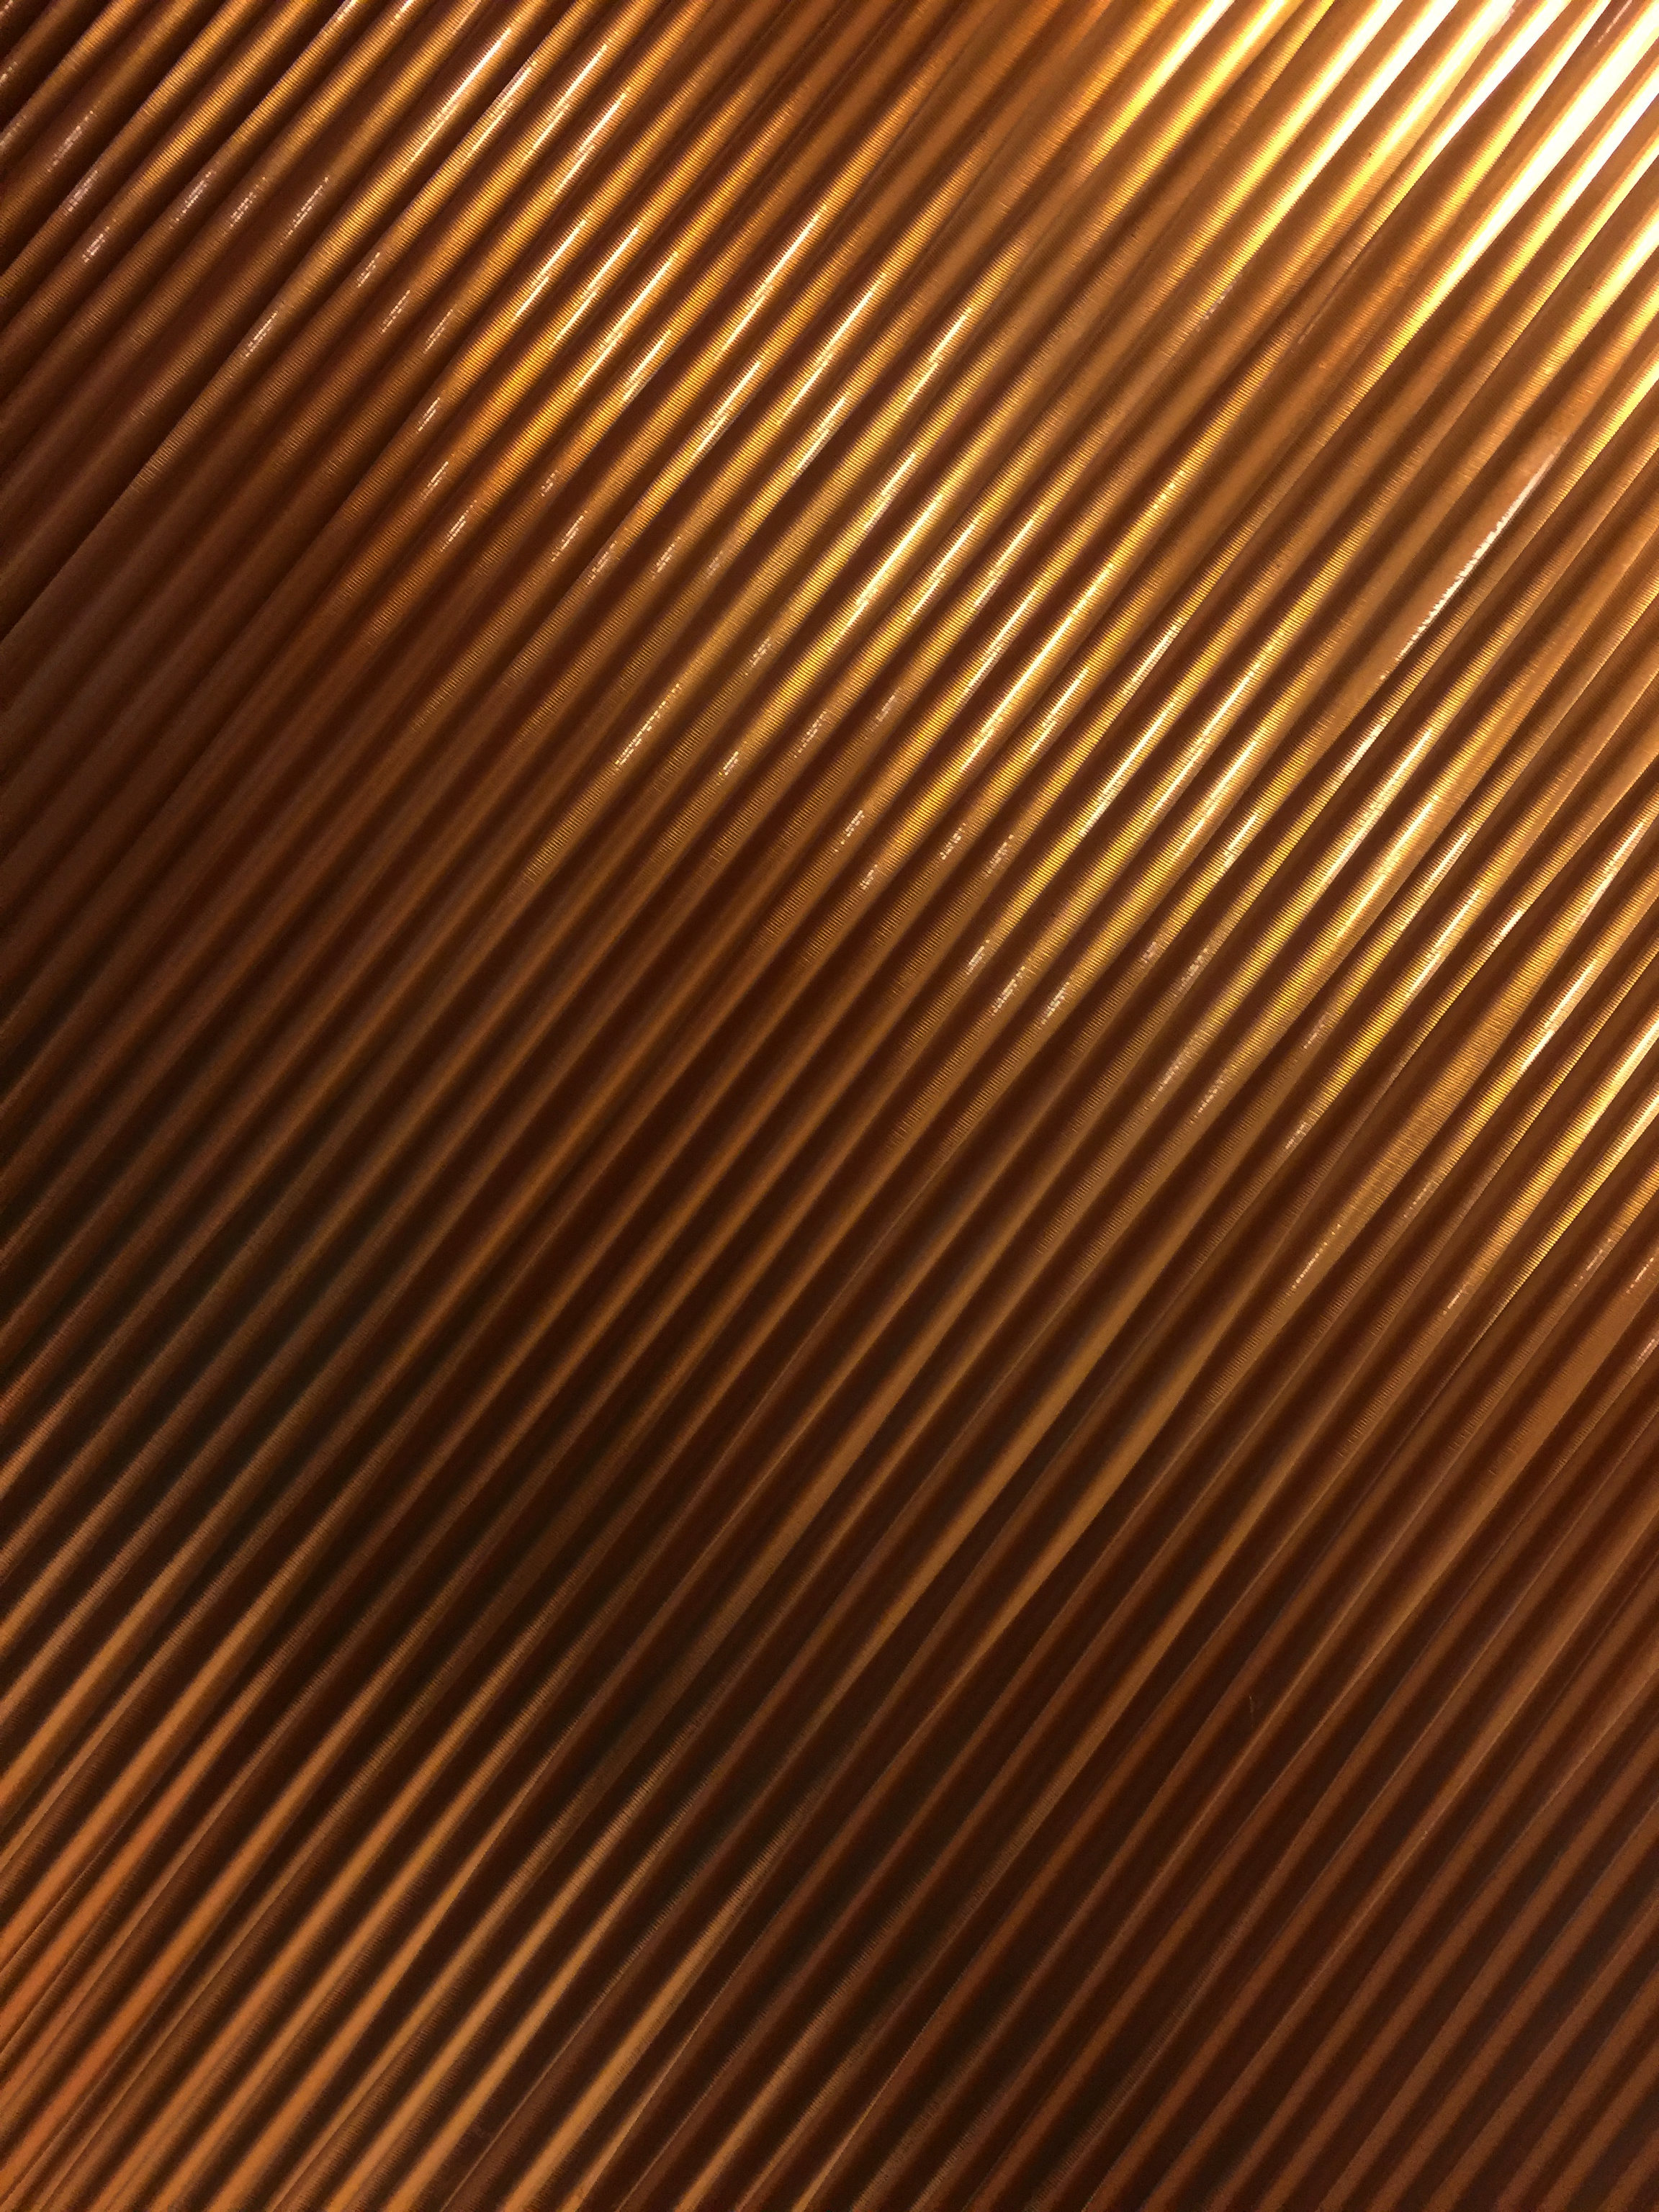 Latest Mobile Wallpaper ribbed, stripes, textures, fluted